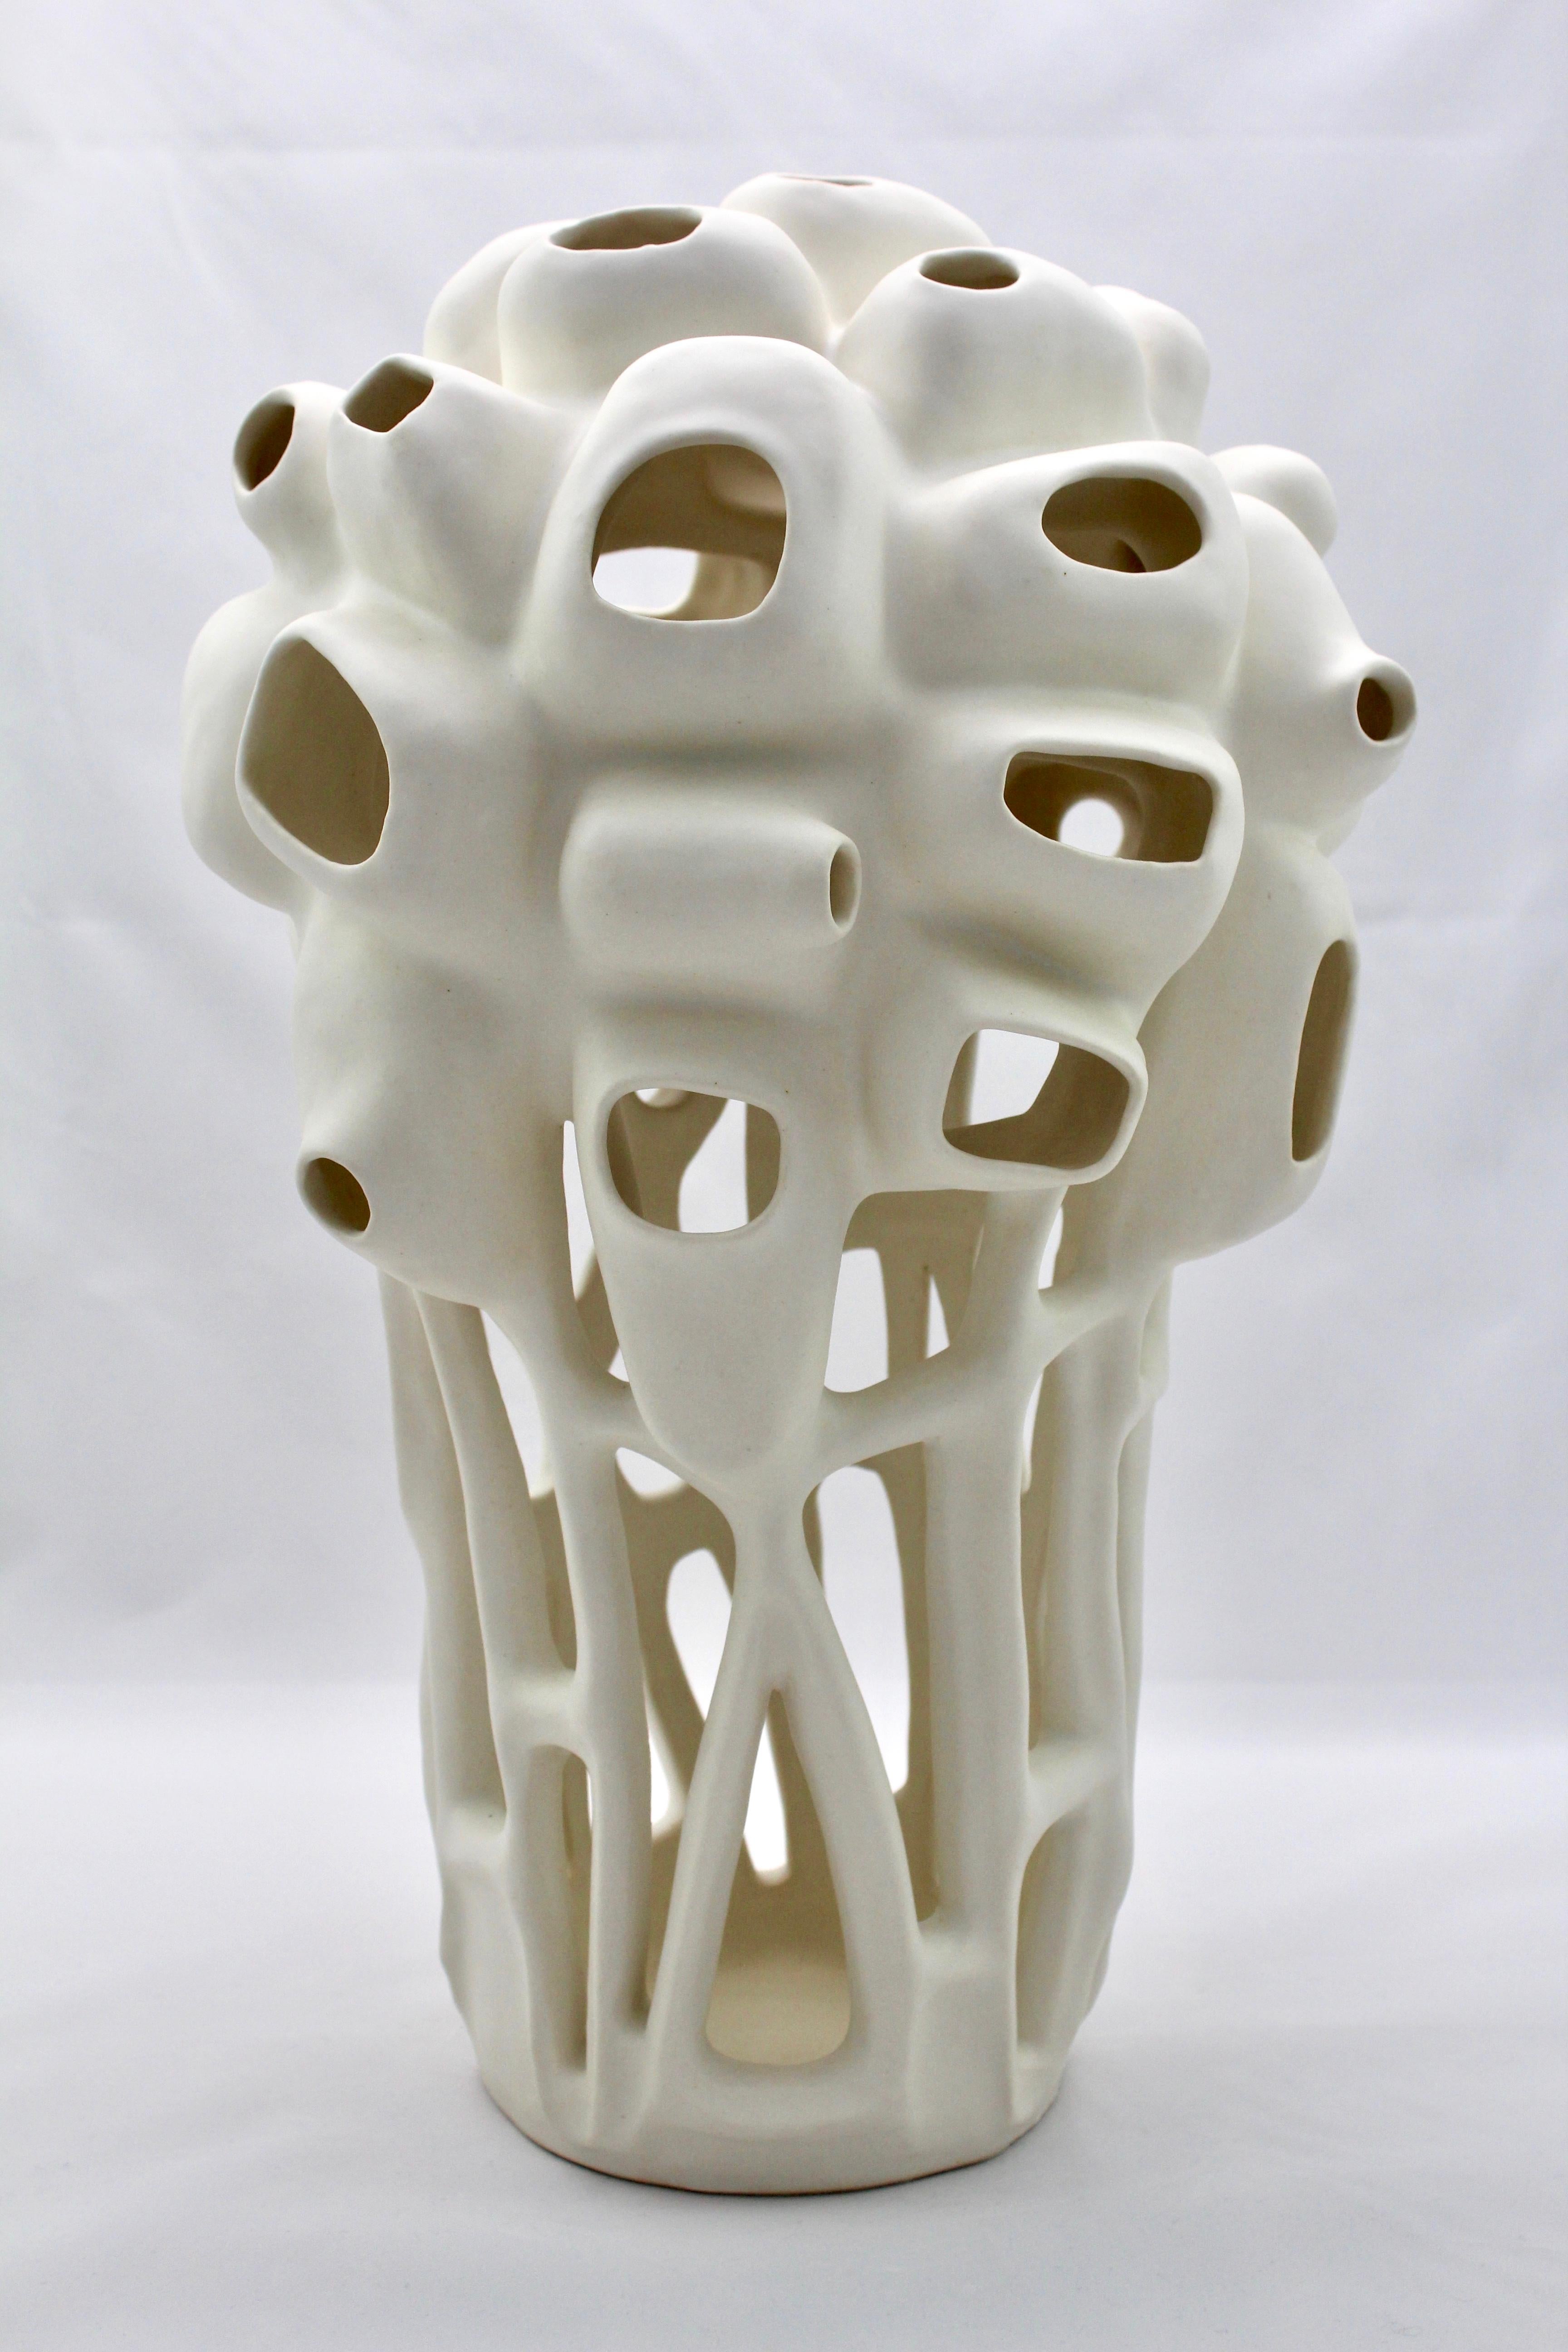 Joan Lurie Abstract Sculpture - Untitled #3 - abstract geometric, organic white glazed porcelain sculpture 